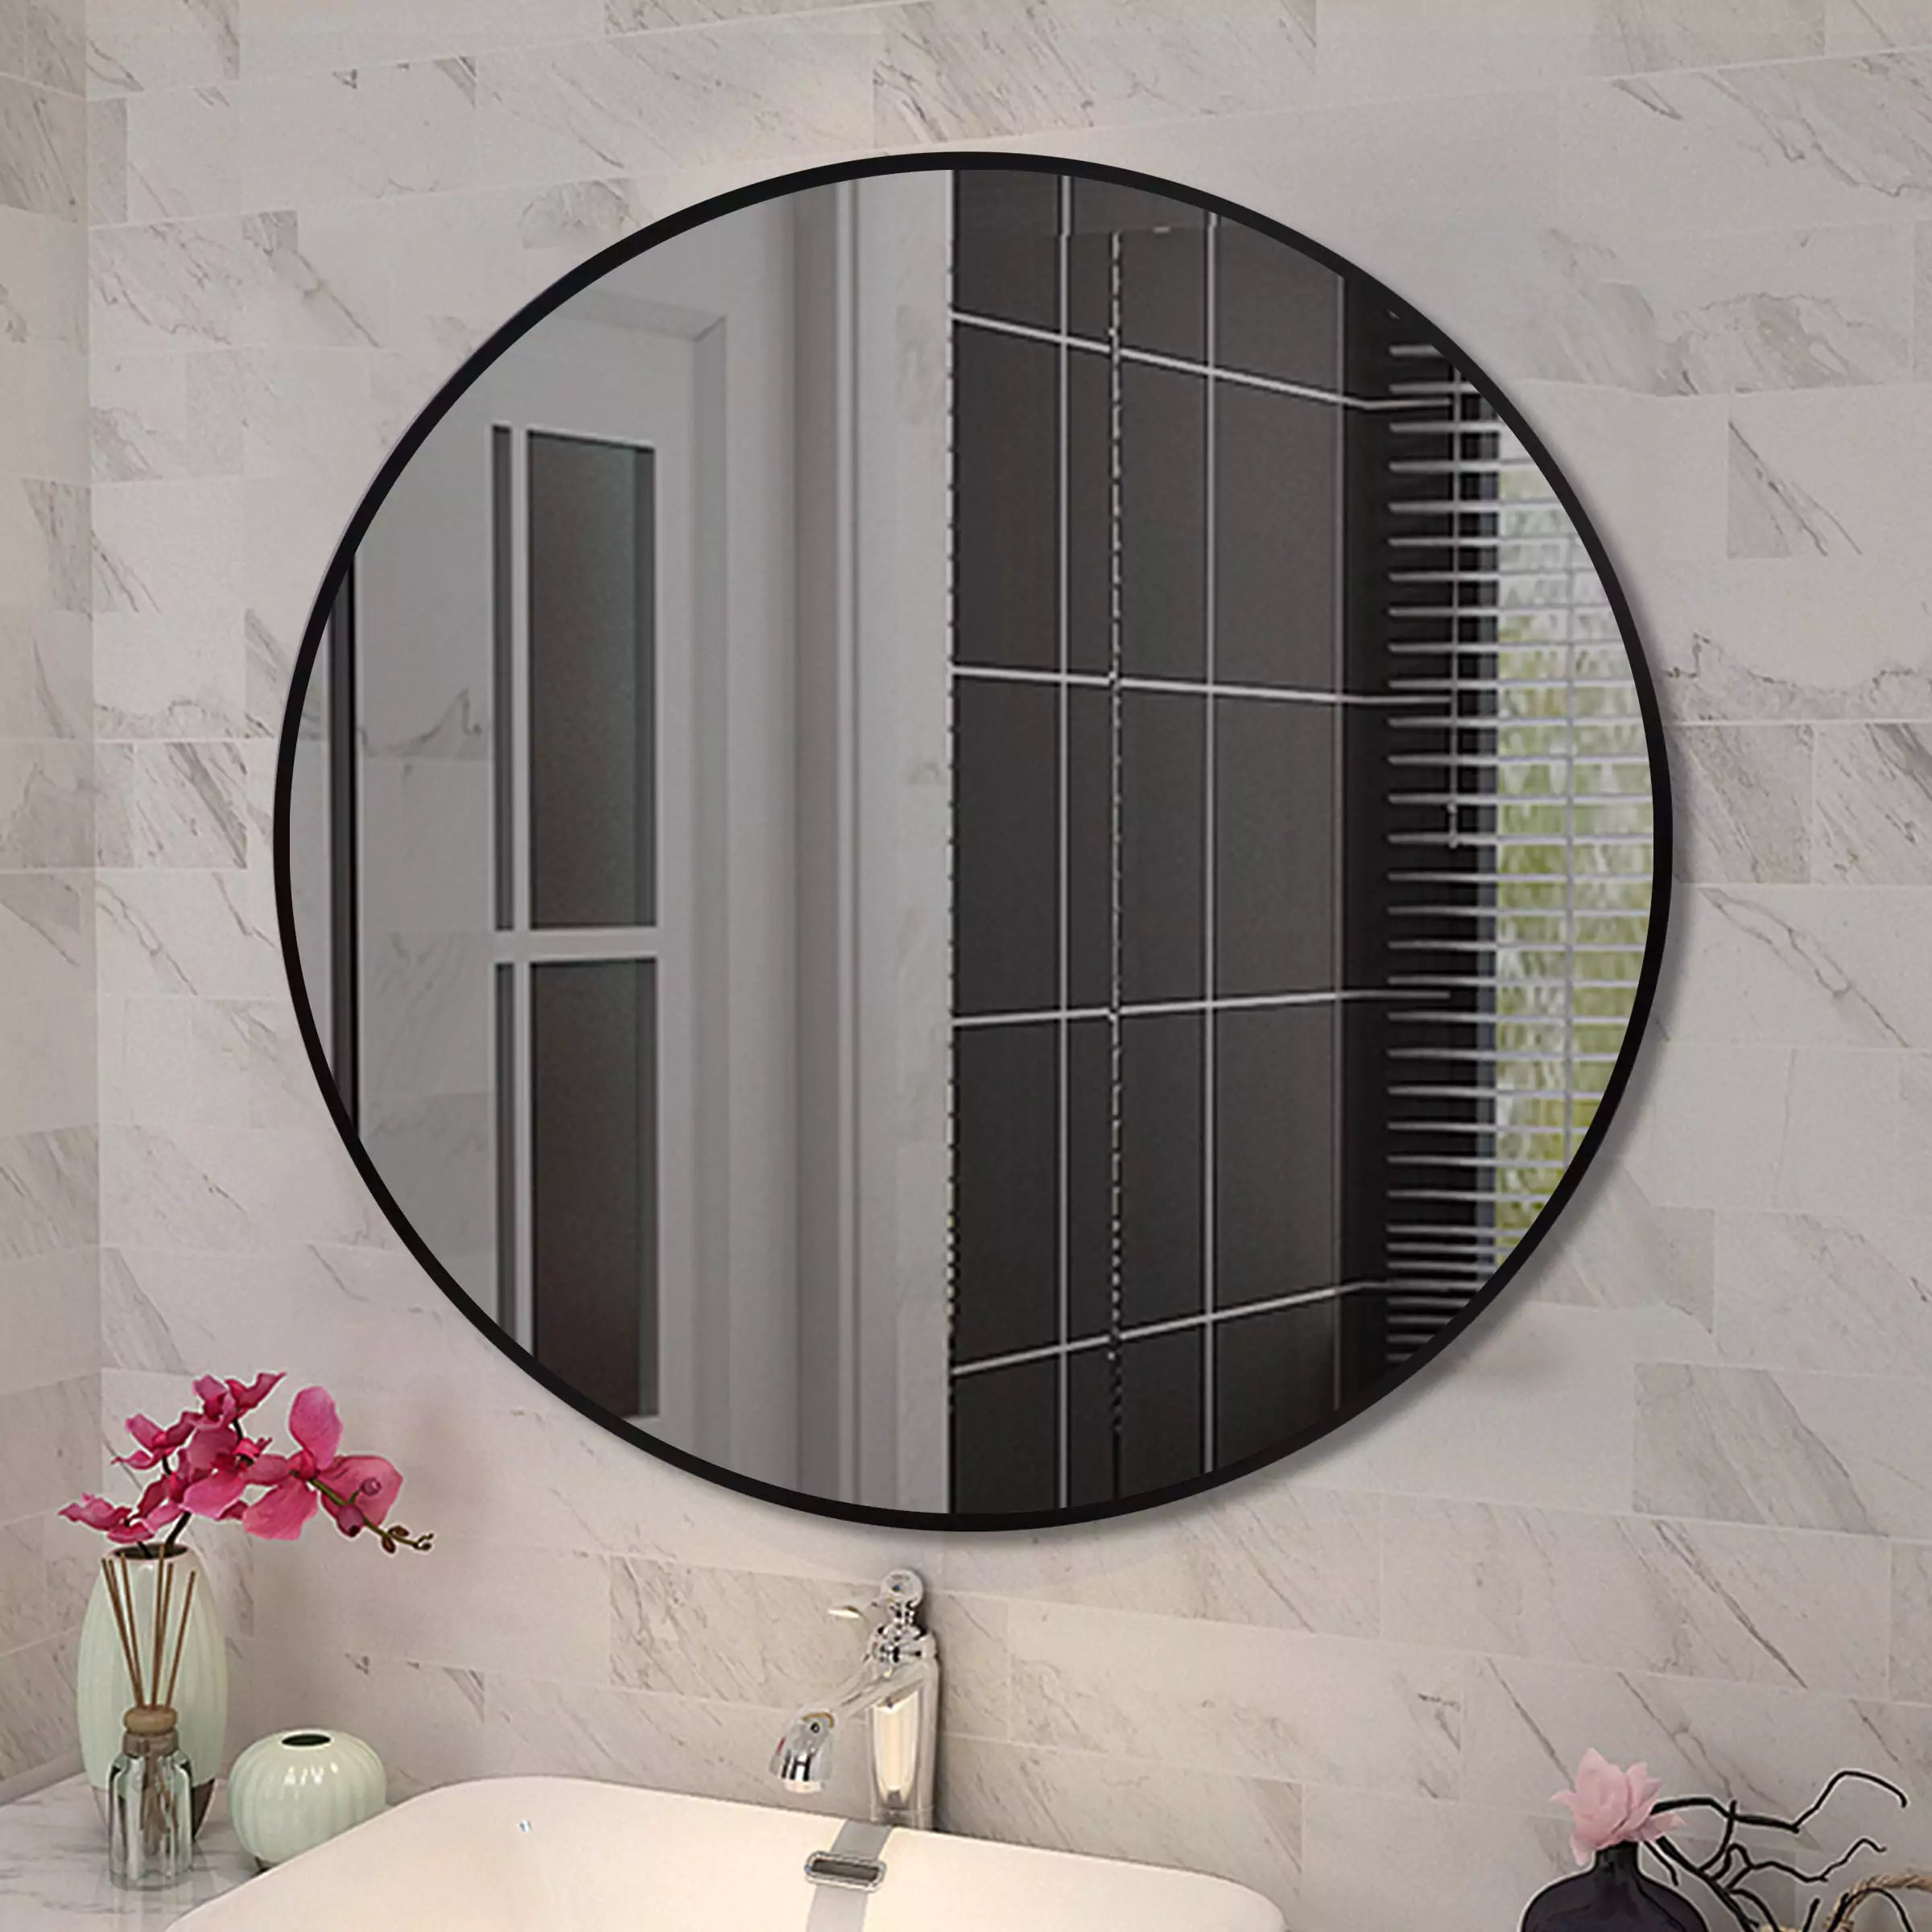 Chic Round Black Aluminum Wall Mirror For Modern And Stylish Interiors - T-600MRB